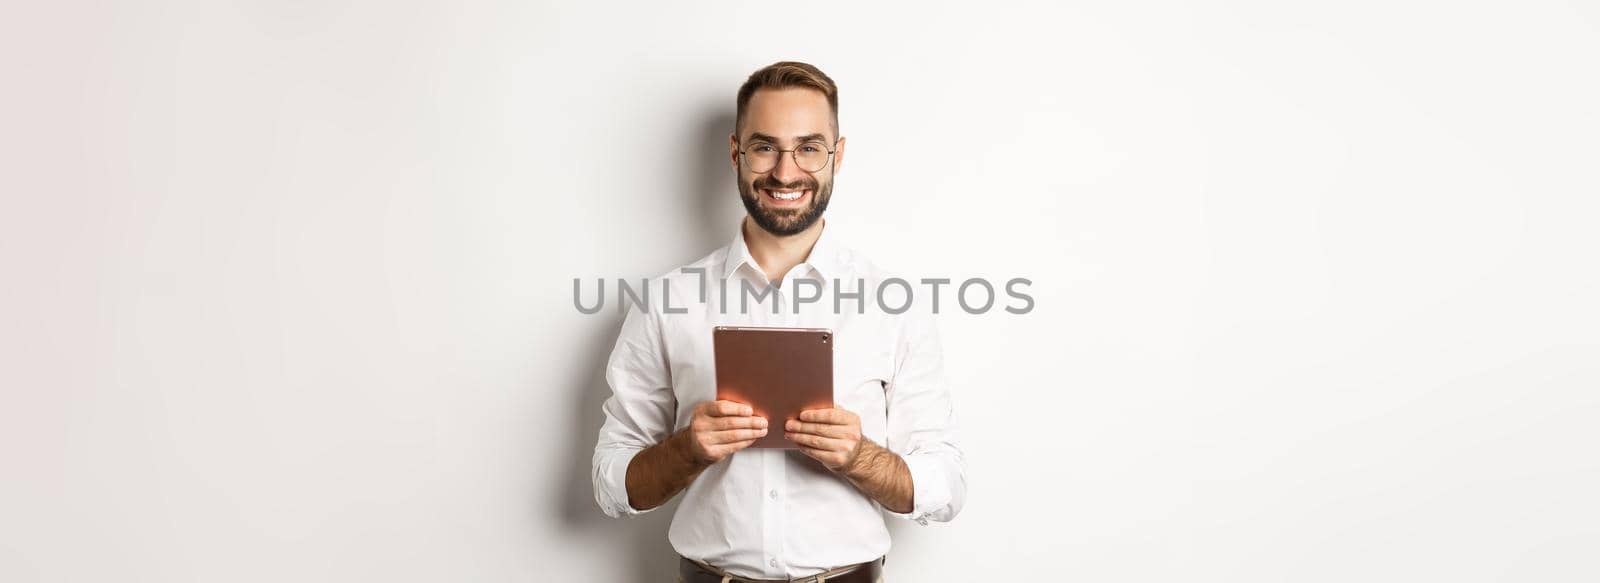 Handsome bearded man in glasses using digital tablet, smiling satisfied, standing against white background.